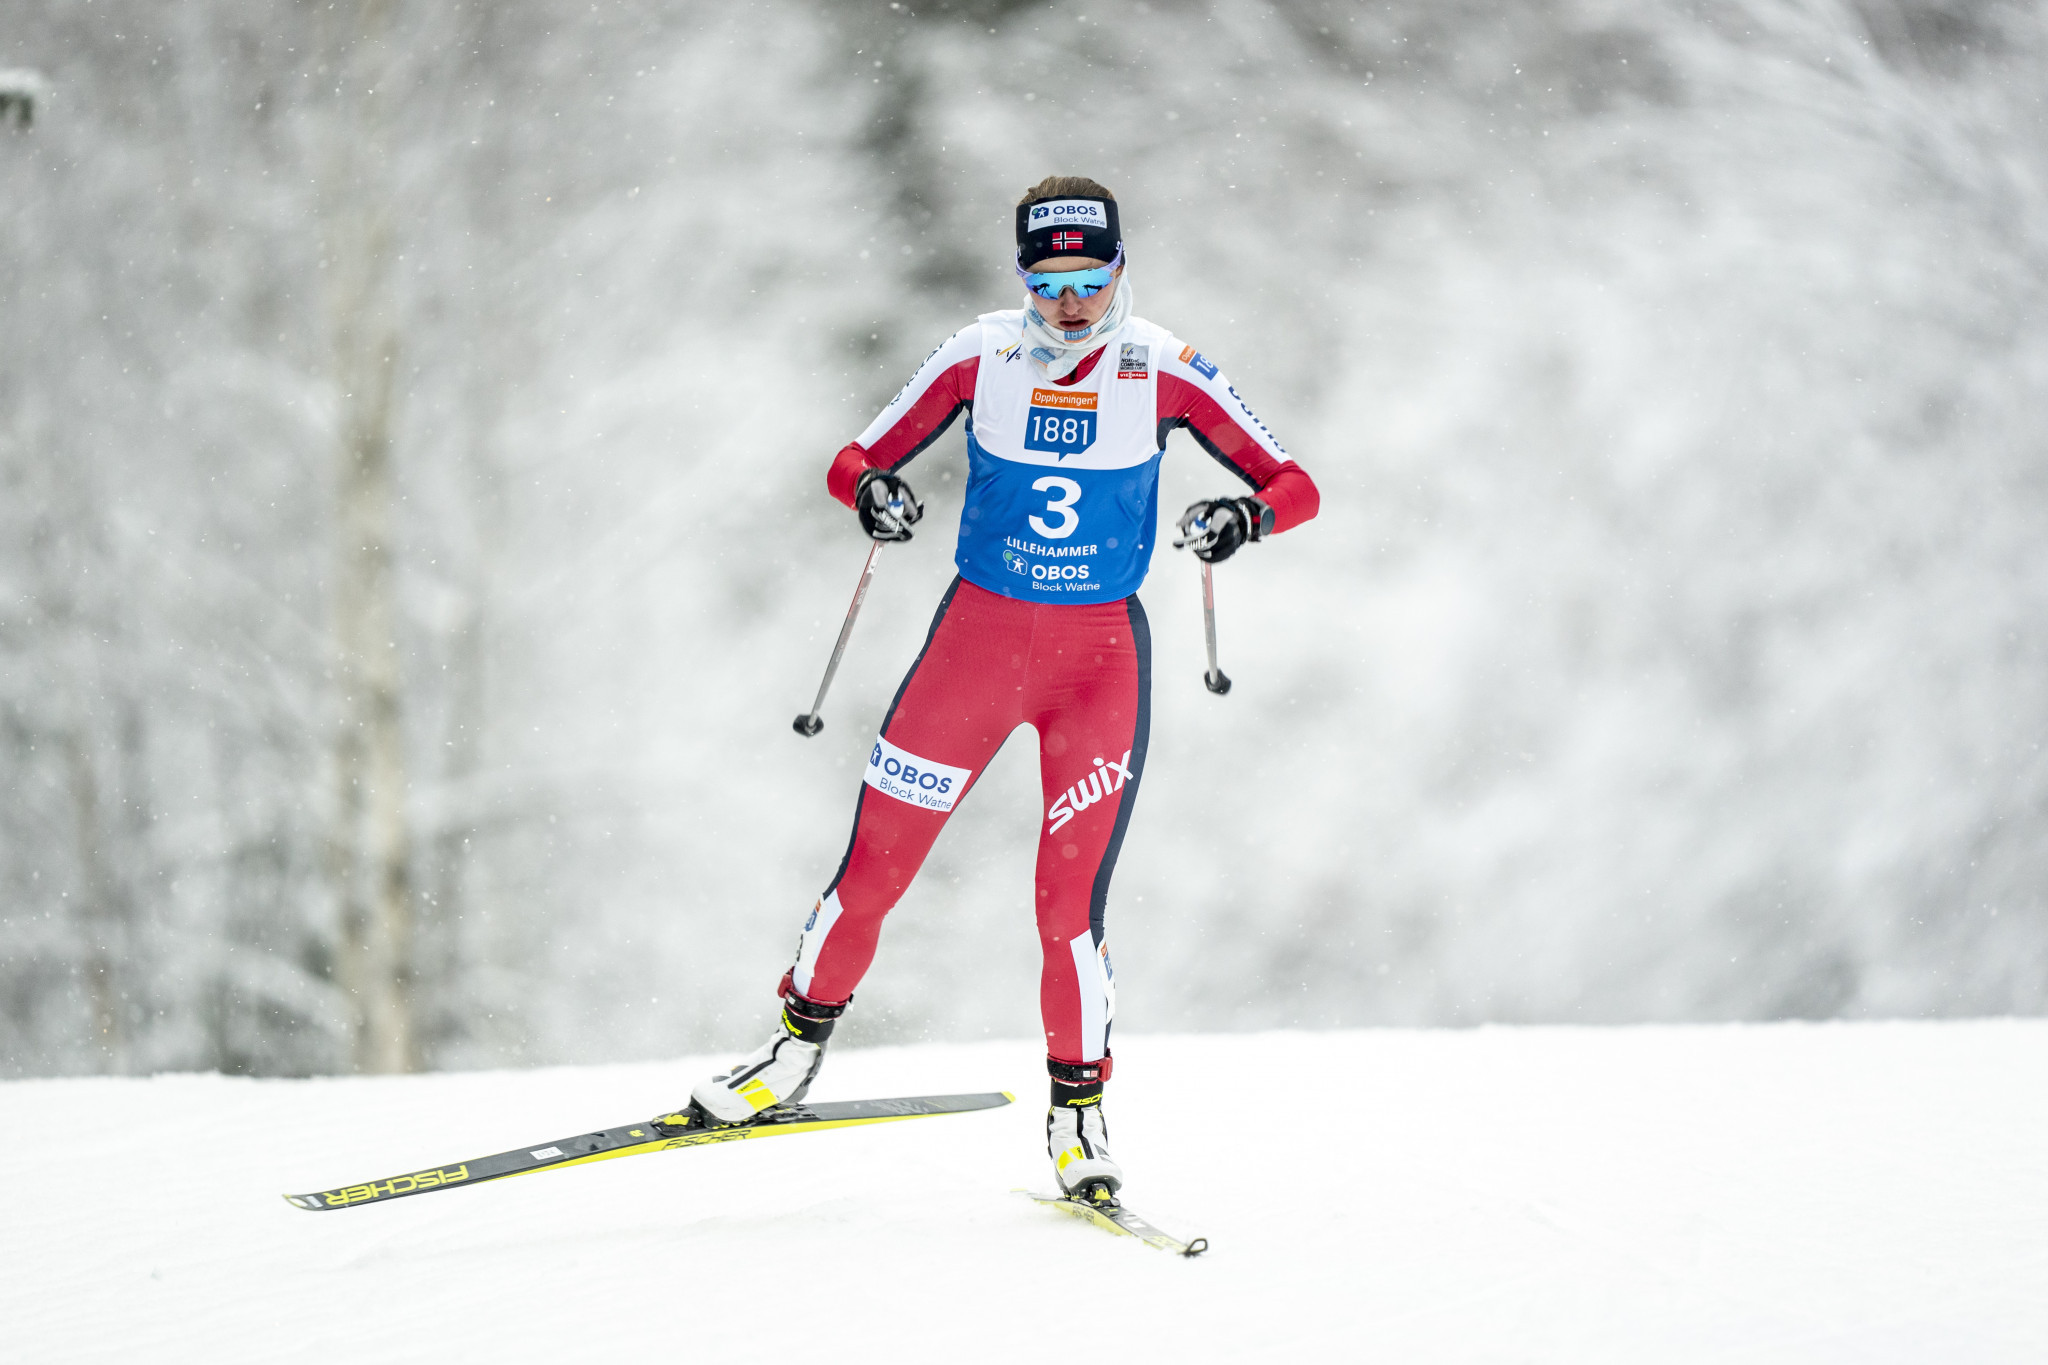 Gyda Westvold Hansen of Norway triumphed at both women's FIS Nordic Combined World Cups in Lillehammer ©Getty Images